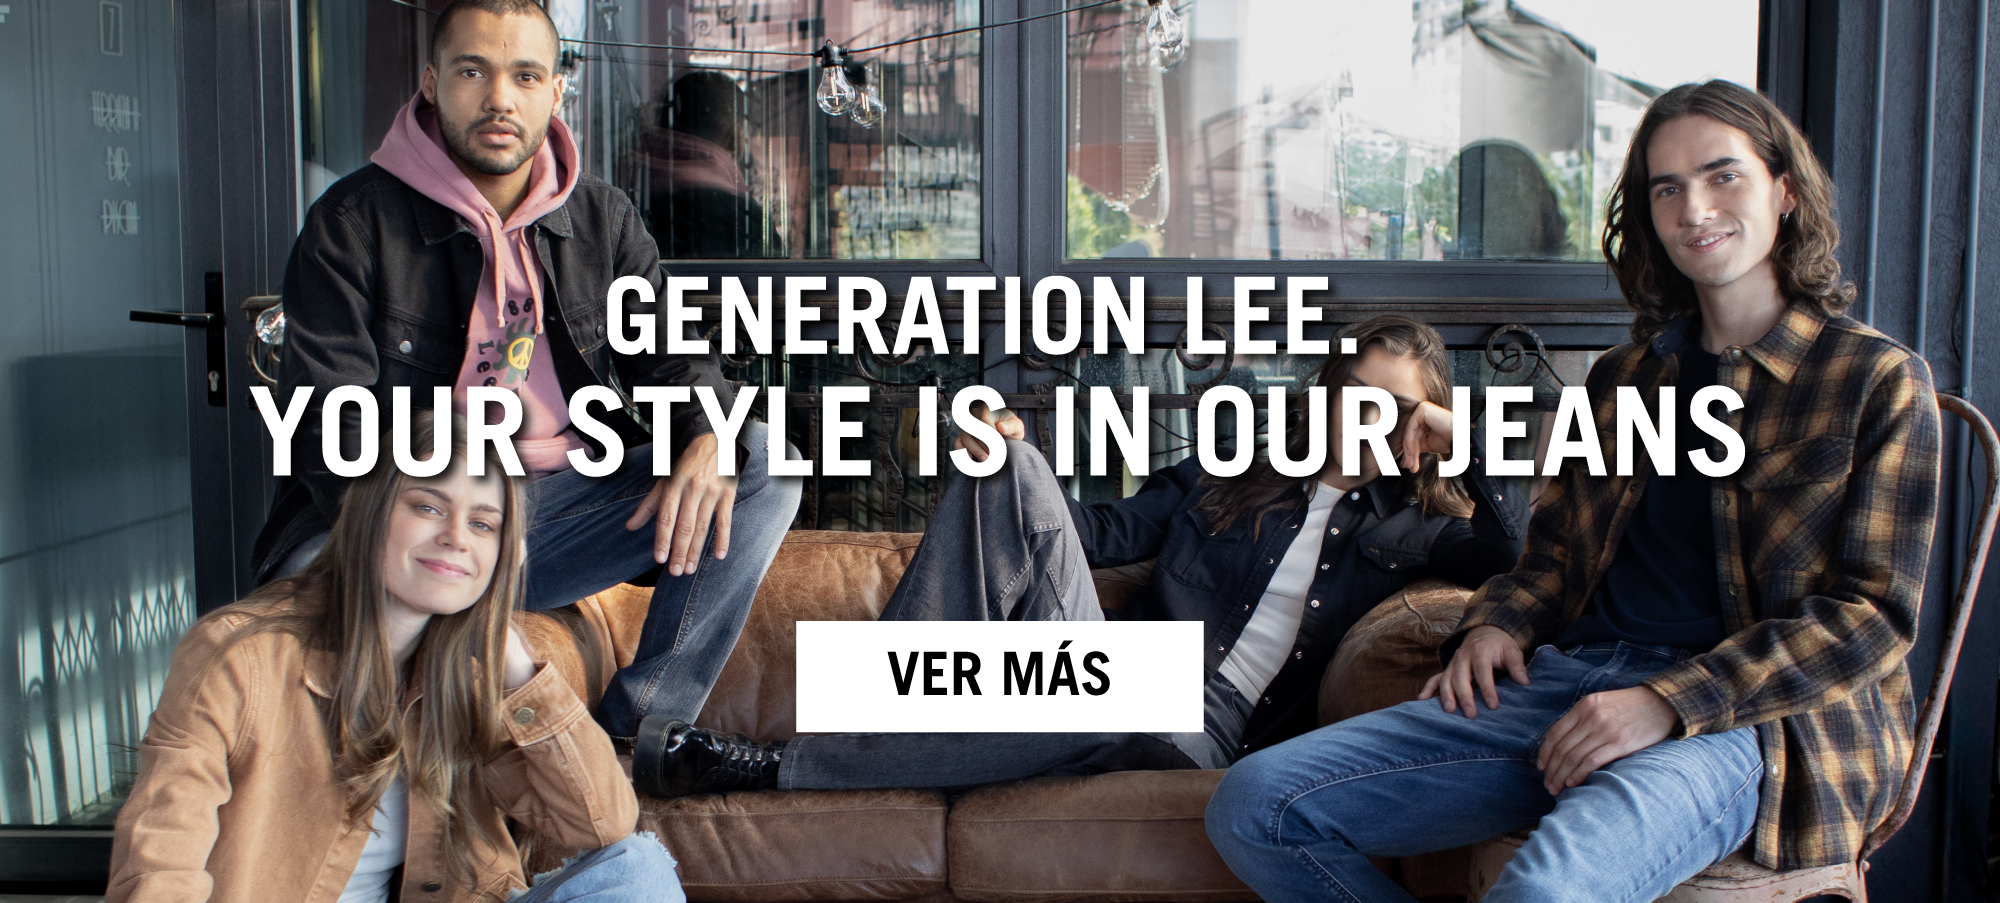 YOUR STYLE IS IN OUR JEANS